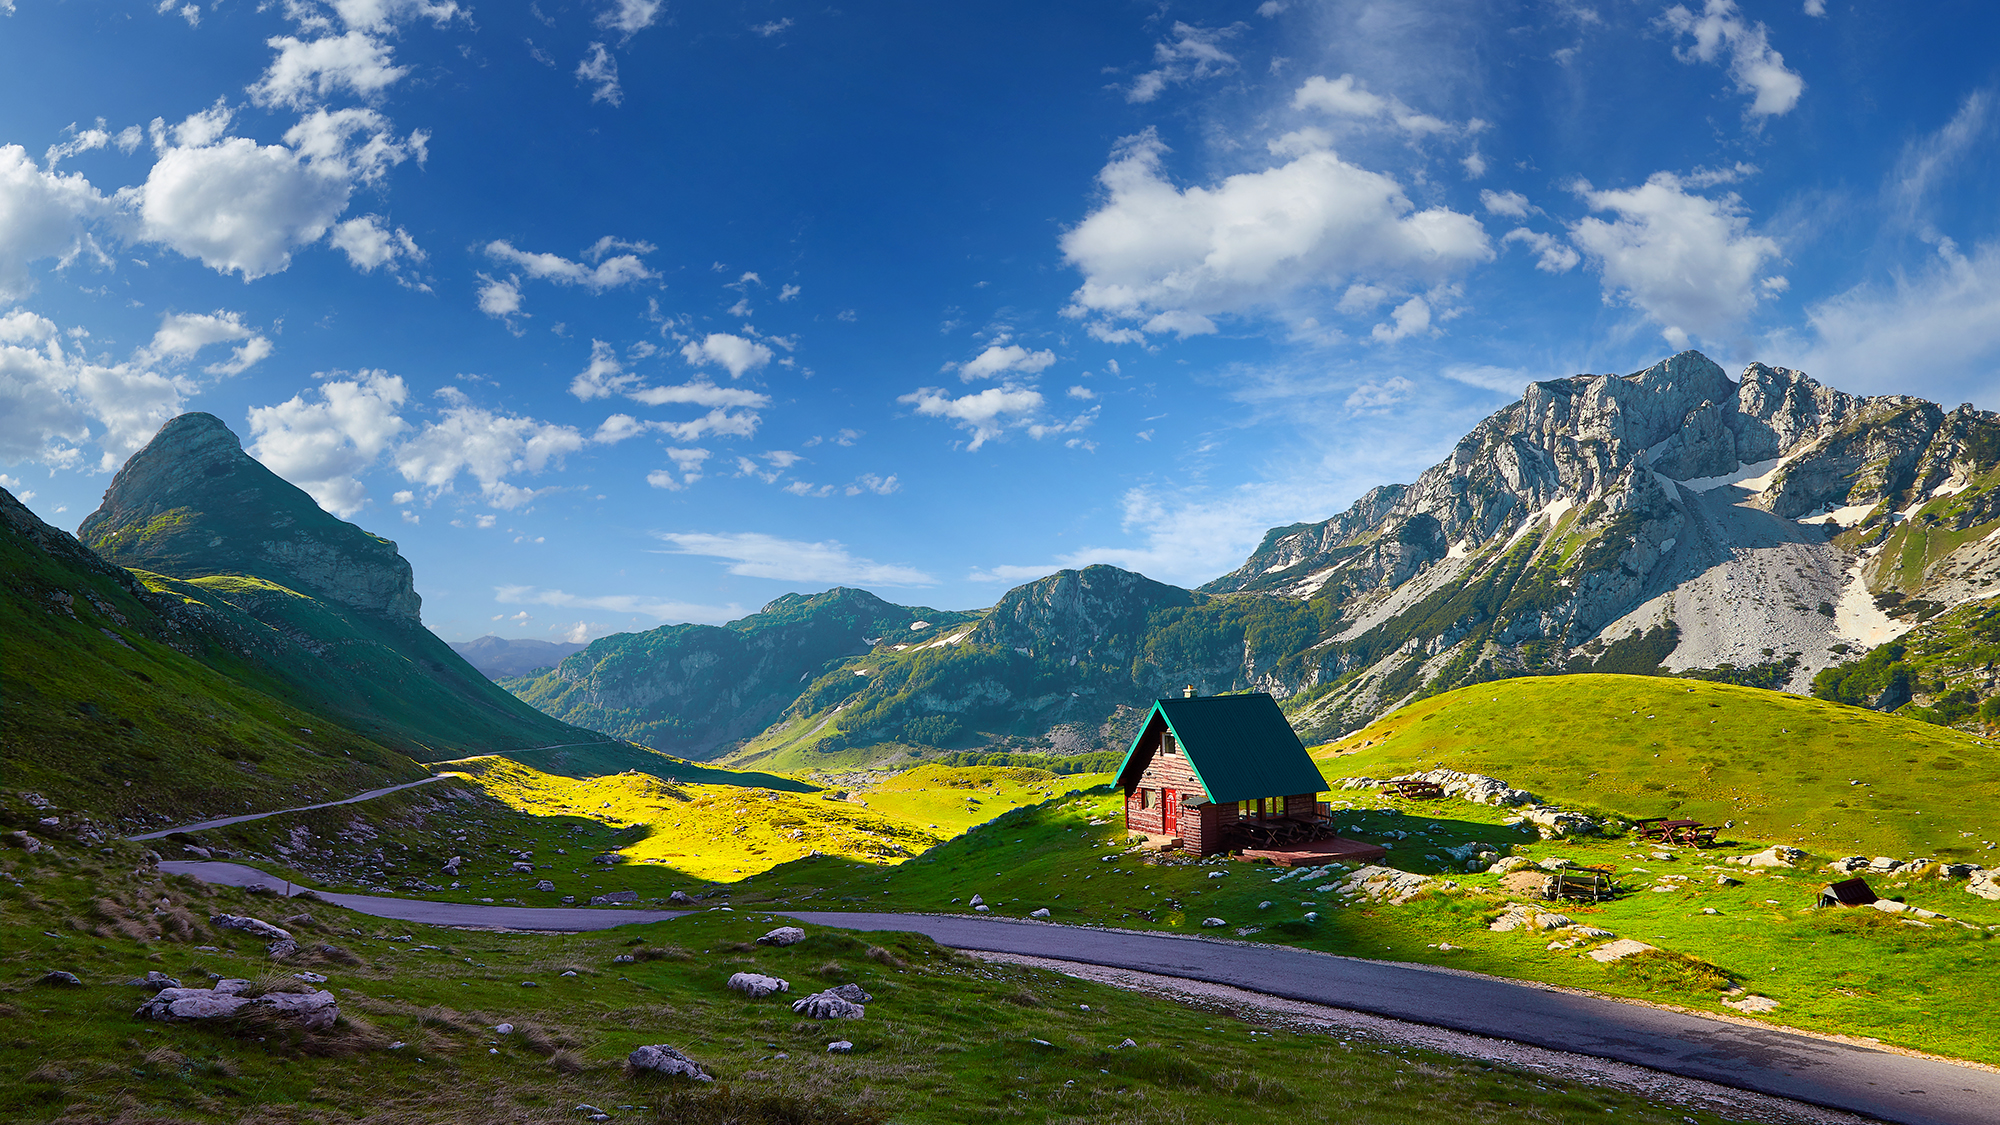 Amaizing sunset view on Durmitor mountains, National Park, Mediterranean, Montenegro, Balkans, Europe.  Bright summer view from Sedlo pass. Instagram picture. The road near the house in the mountains.